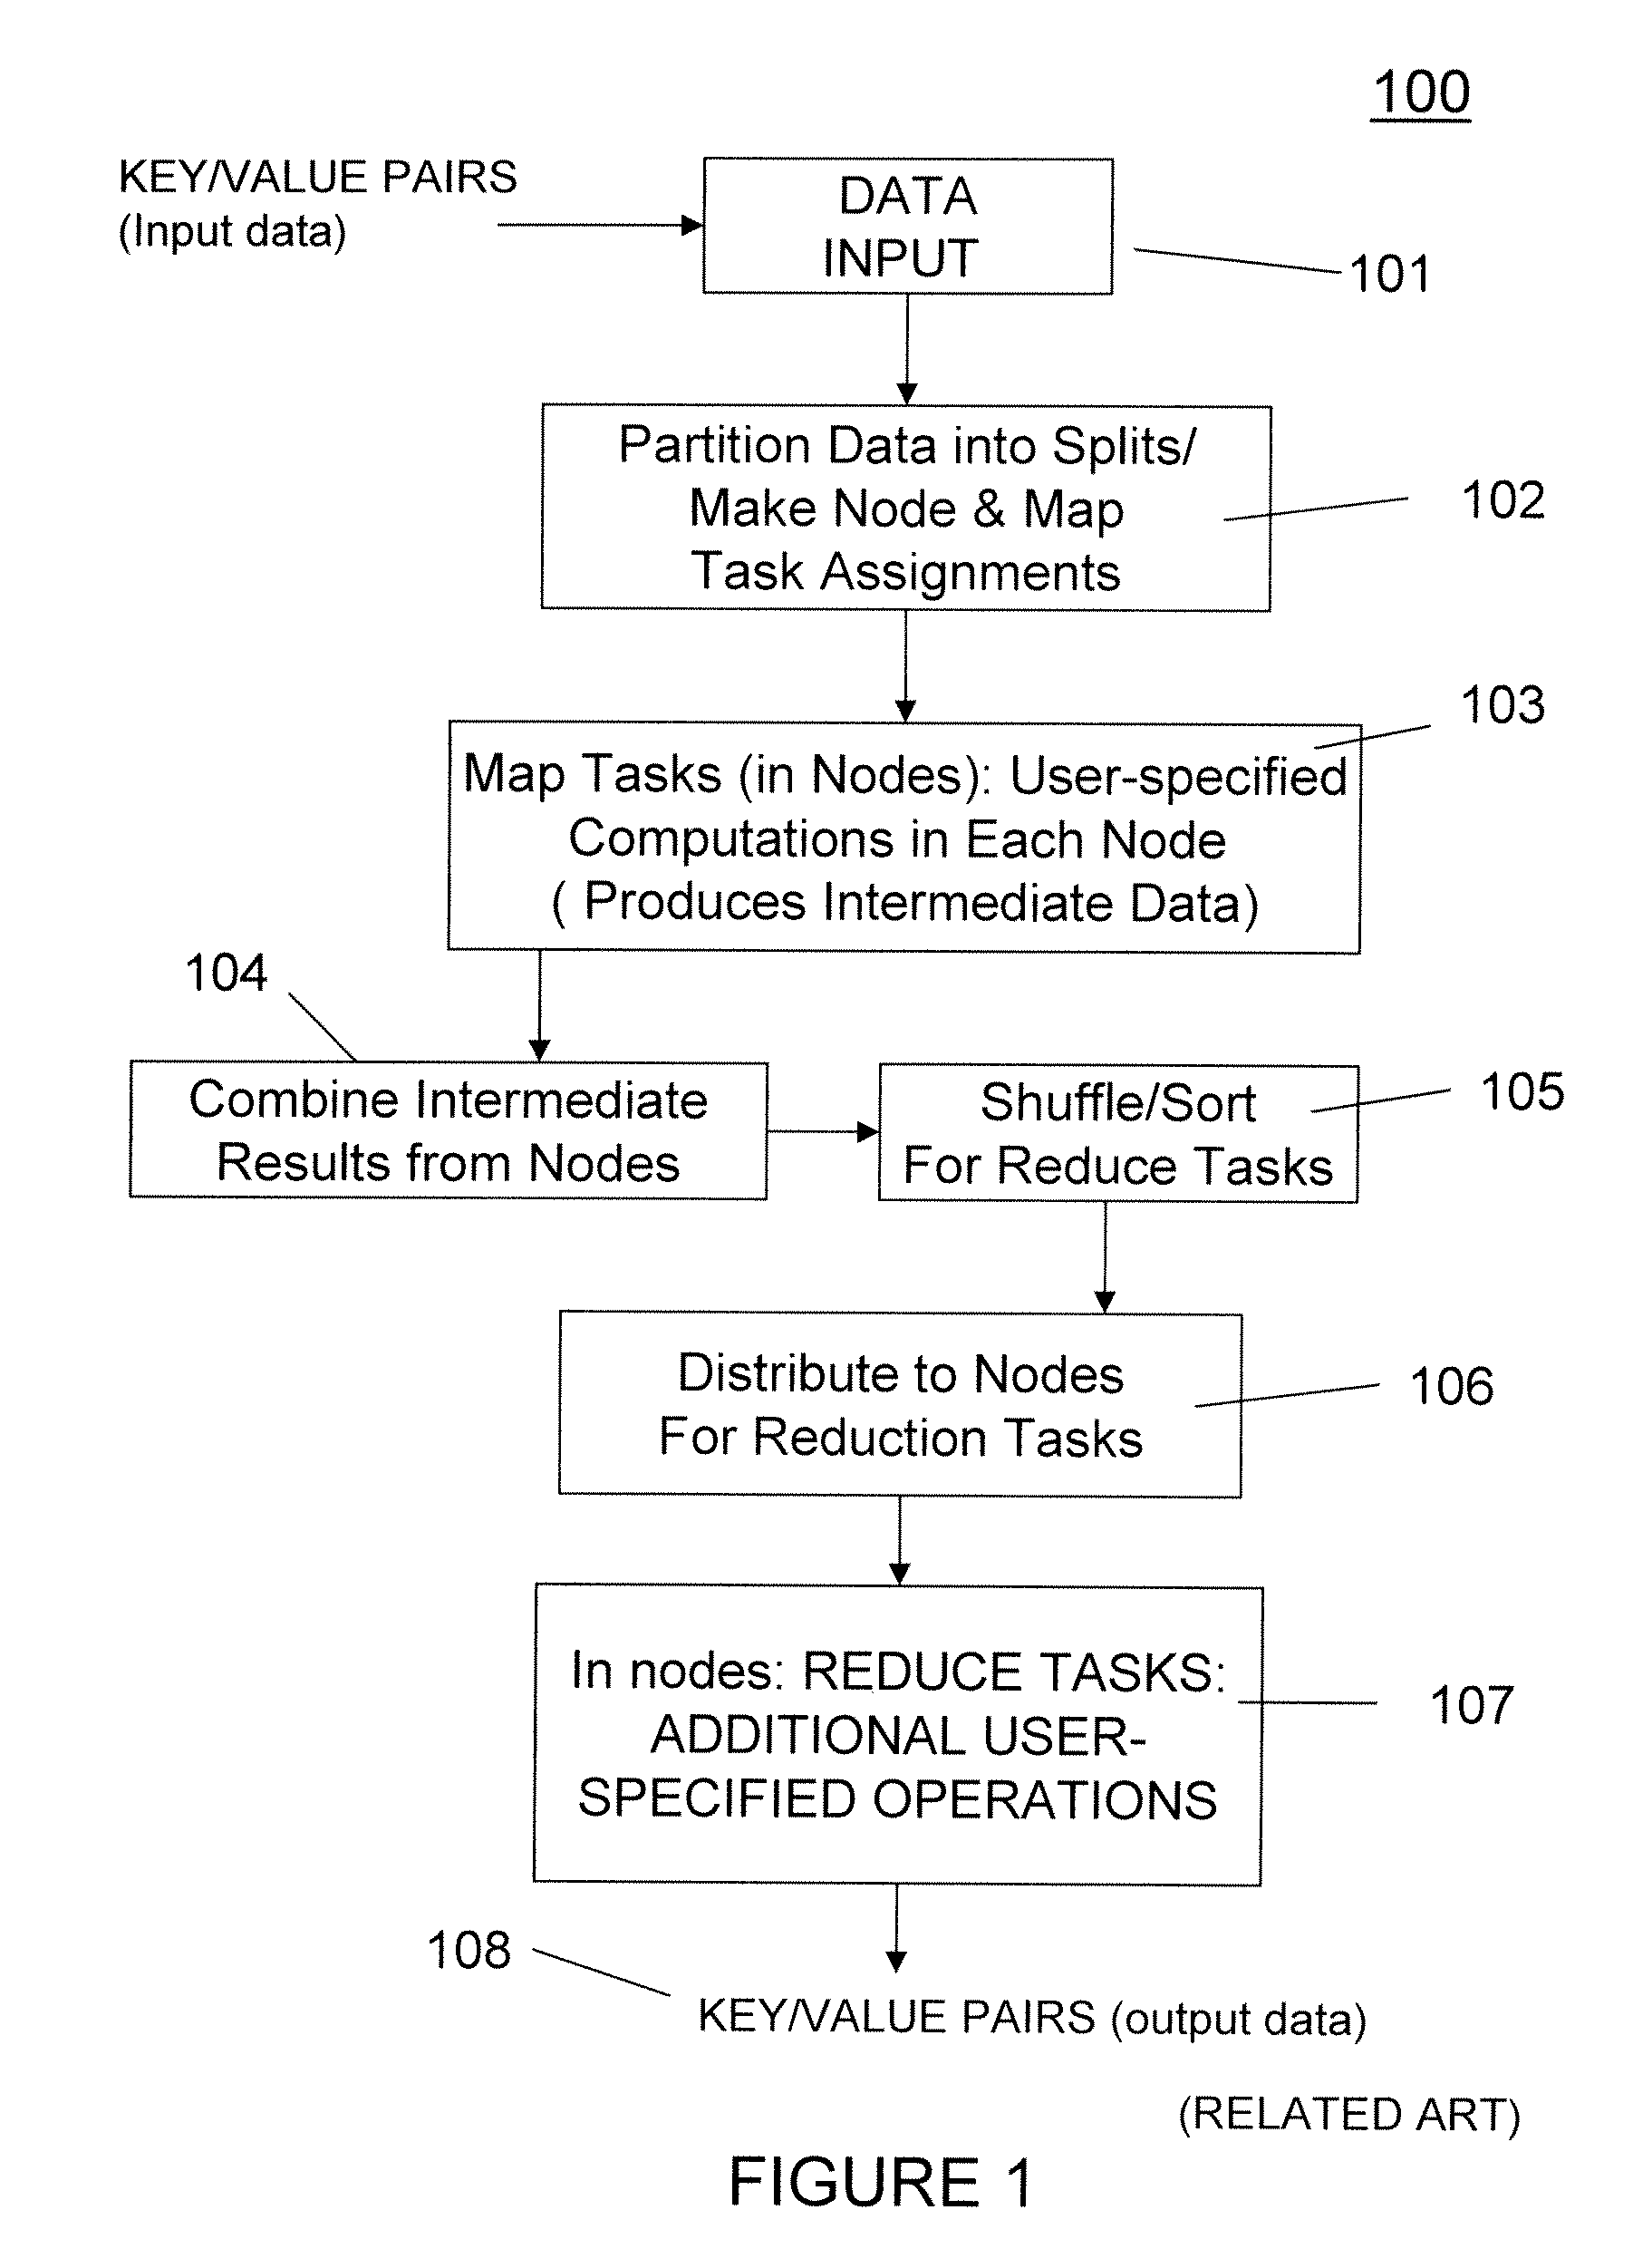 System and method to improve I/O performance of data analytic workloads